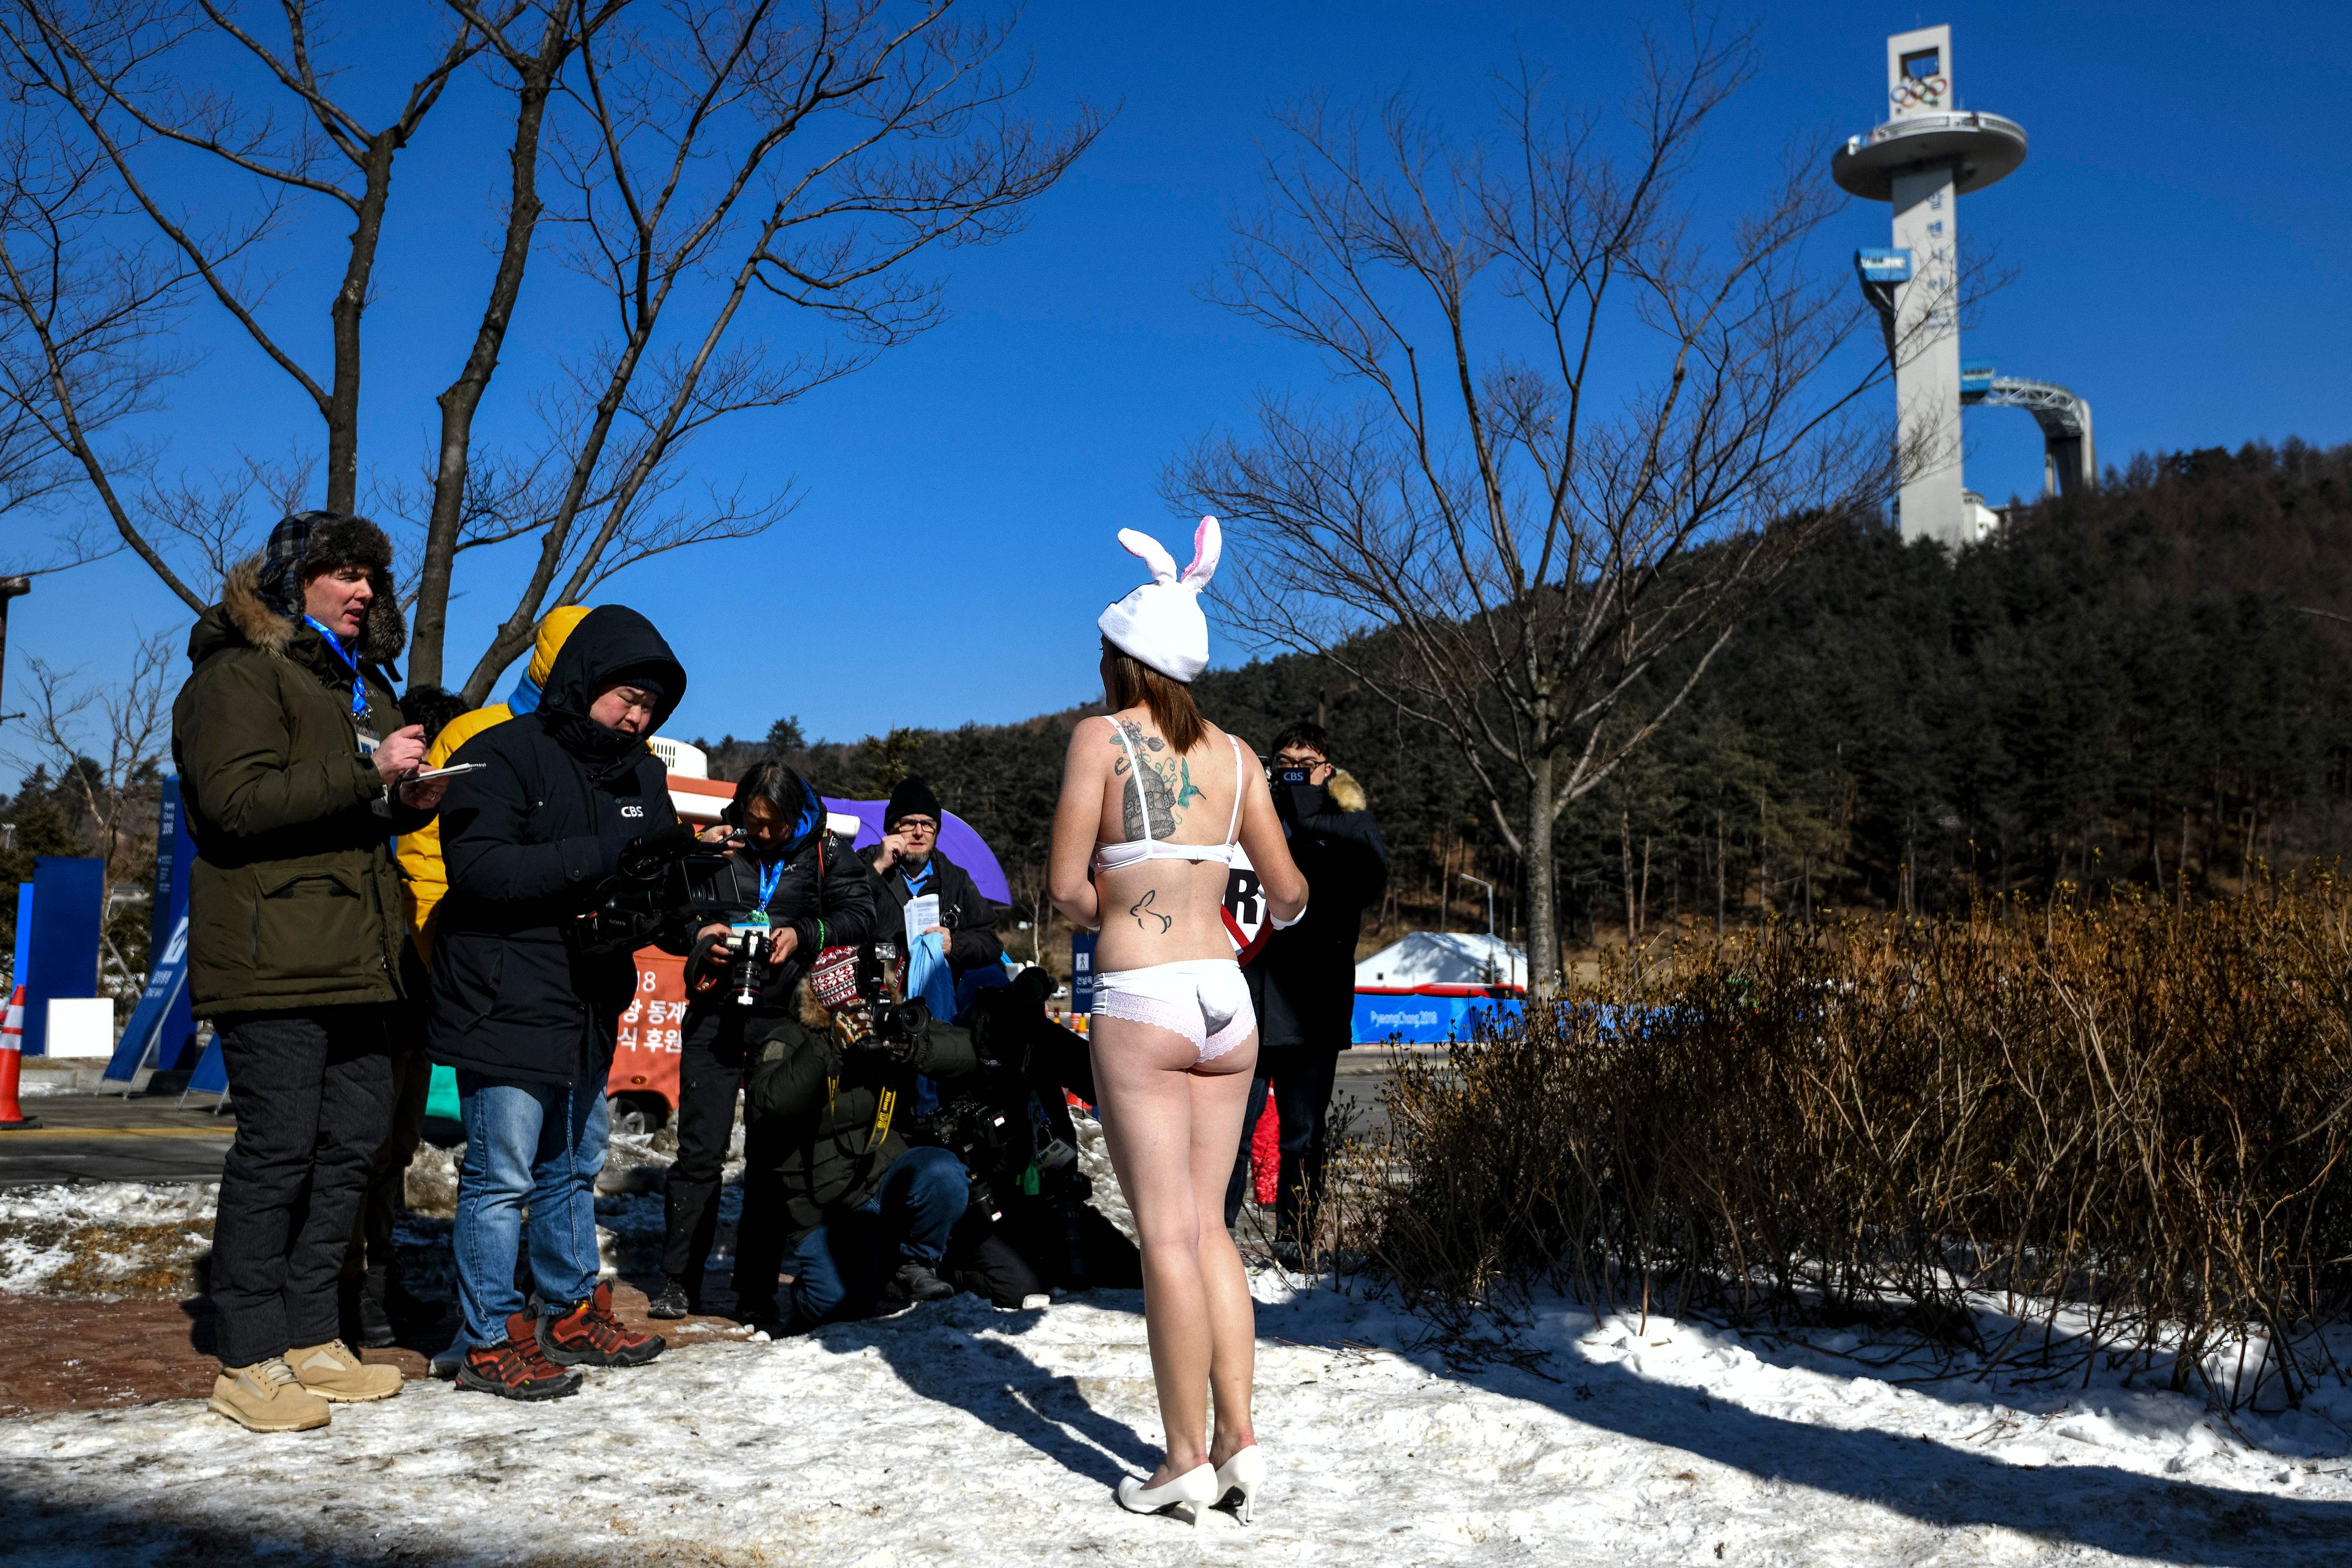 An activist of the People for the Ethical Treatment of Animals (PETA) attends a protest next the Olympics ski jumping tower ahead of the Pyeongchang 2018 Winter Olympic Games in Pyeongchang on February 6, 2018. / AFP PHOTO / Dimitar DILKOFF